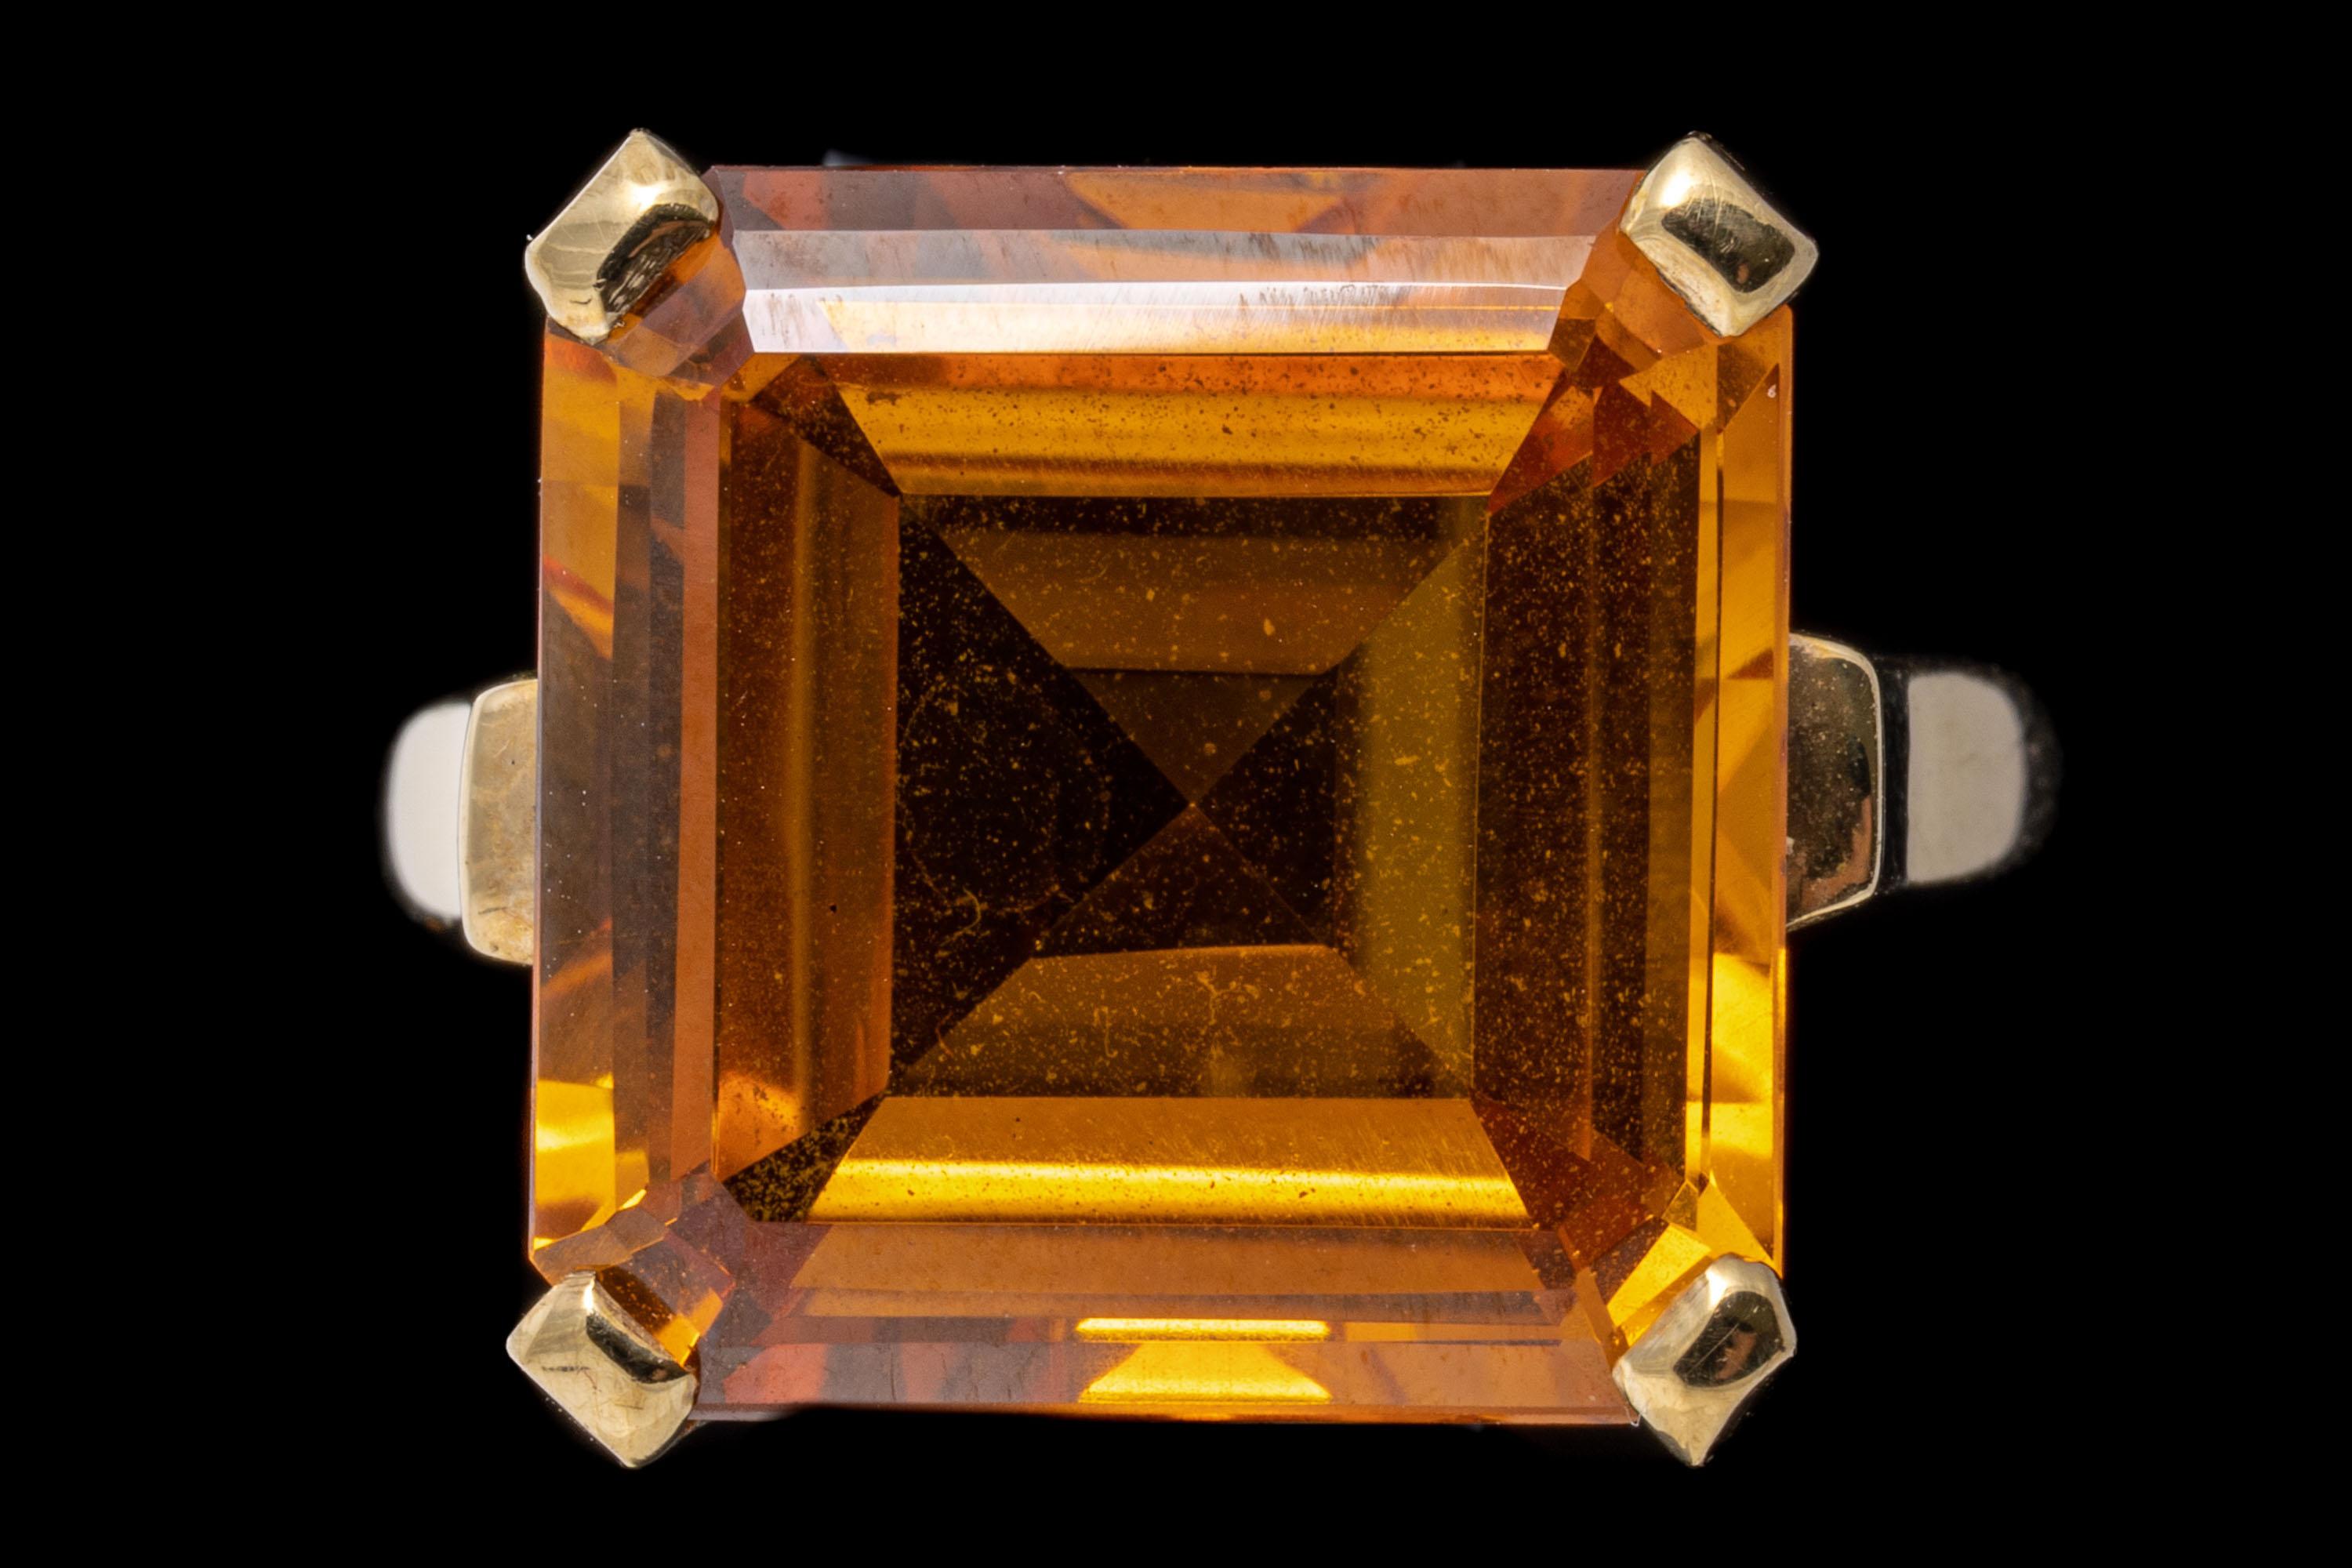 10k yellow gold ring. This simple vintage ring features a center square faceted, yellow orange lab grown sapphire, decorated with a scrolled gallery and airline styled shoulders.
Marks: 10k
Dimensions: 9/16